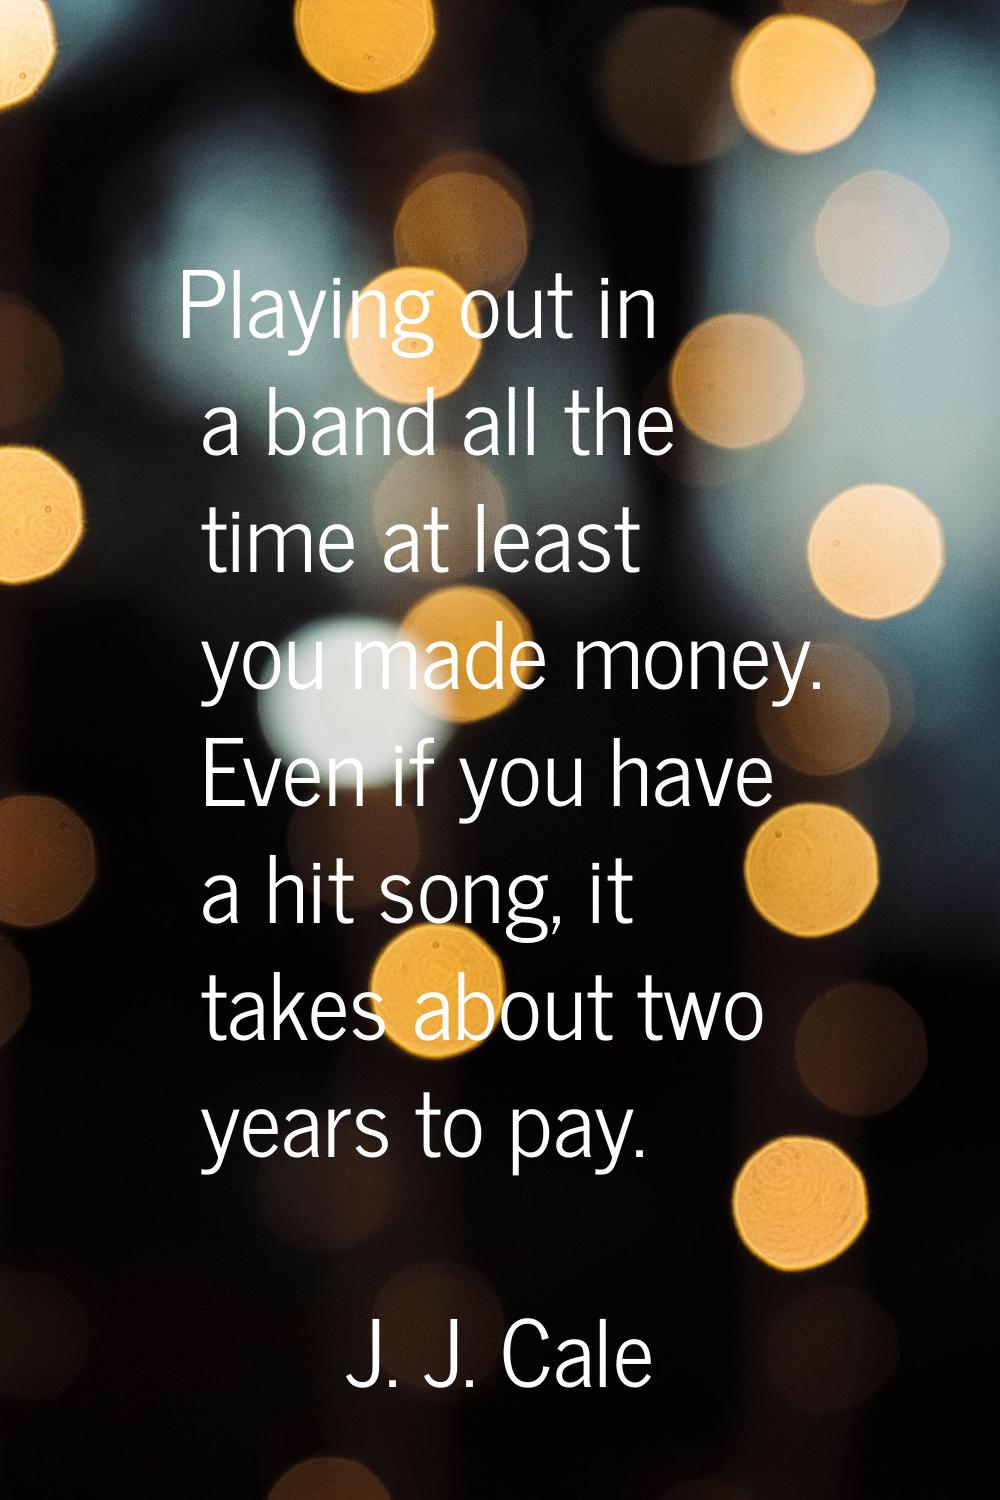 Playing out in a band all the time at least you made money. Even if you have a hit song, it takes a